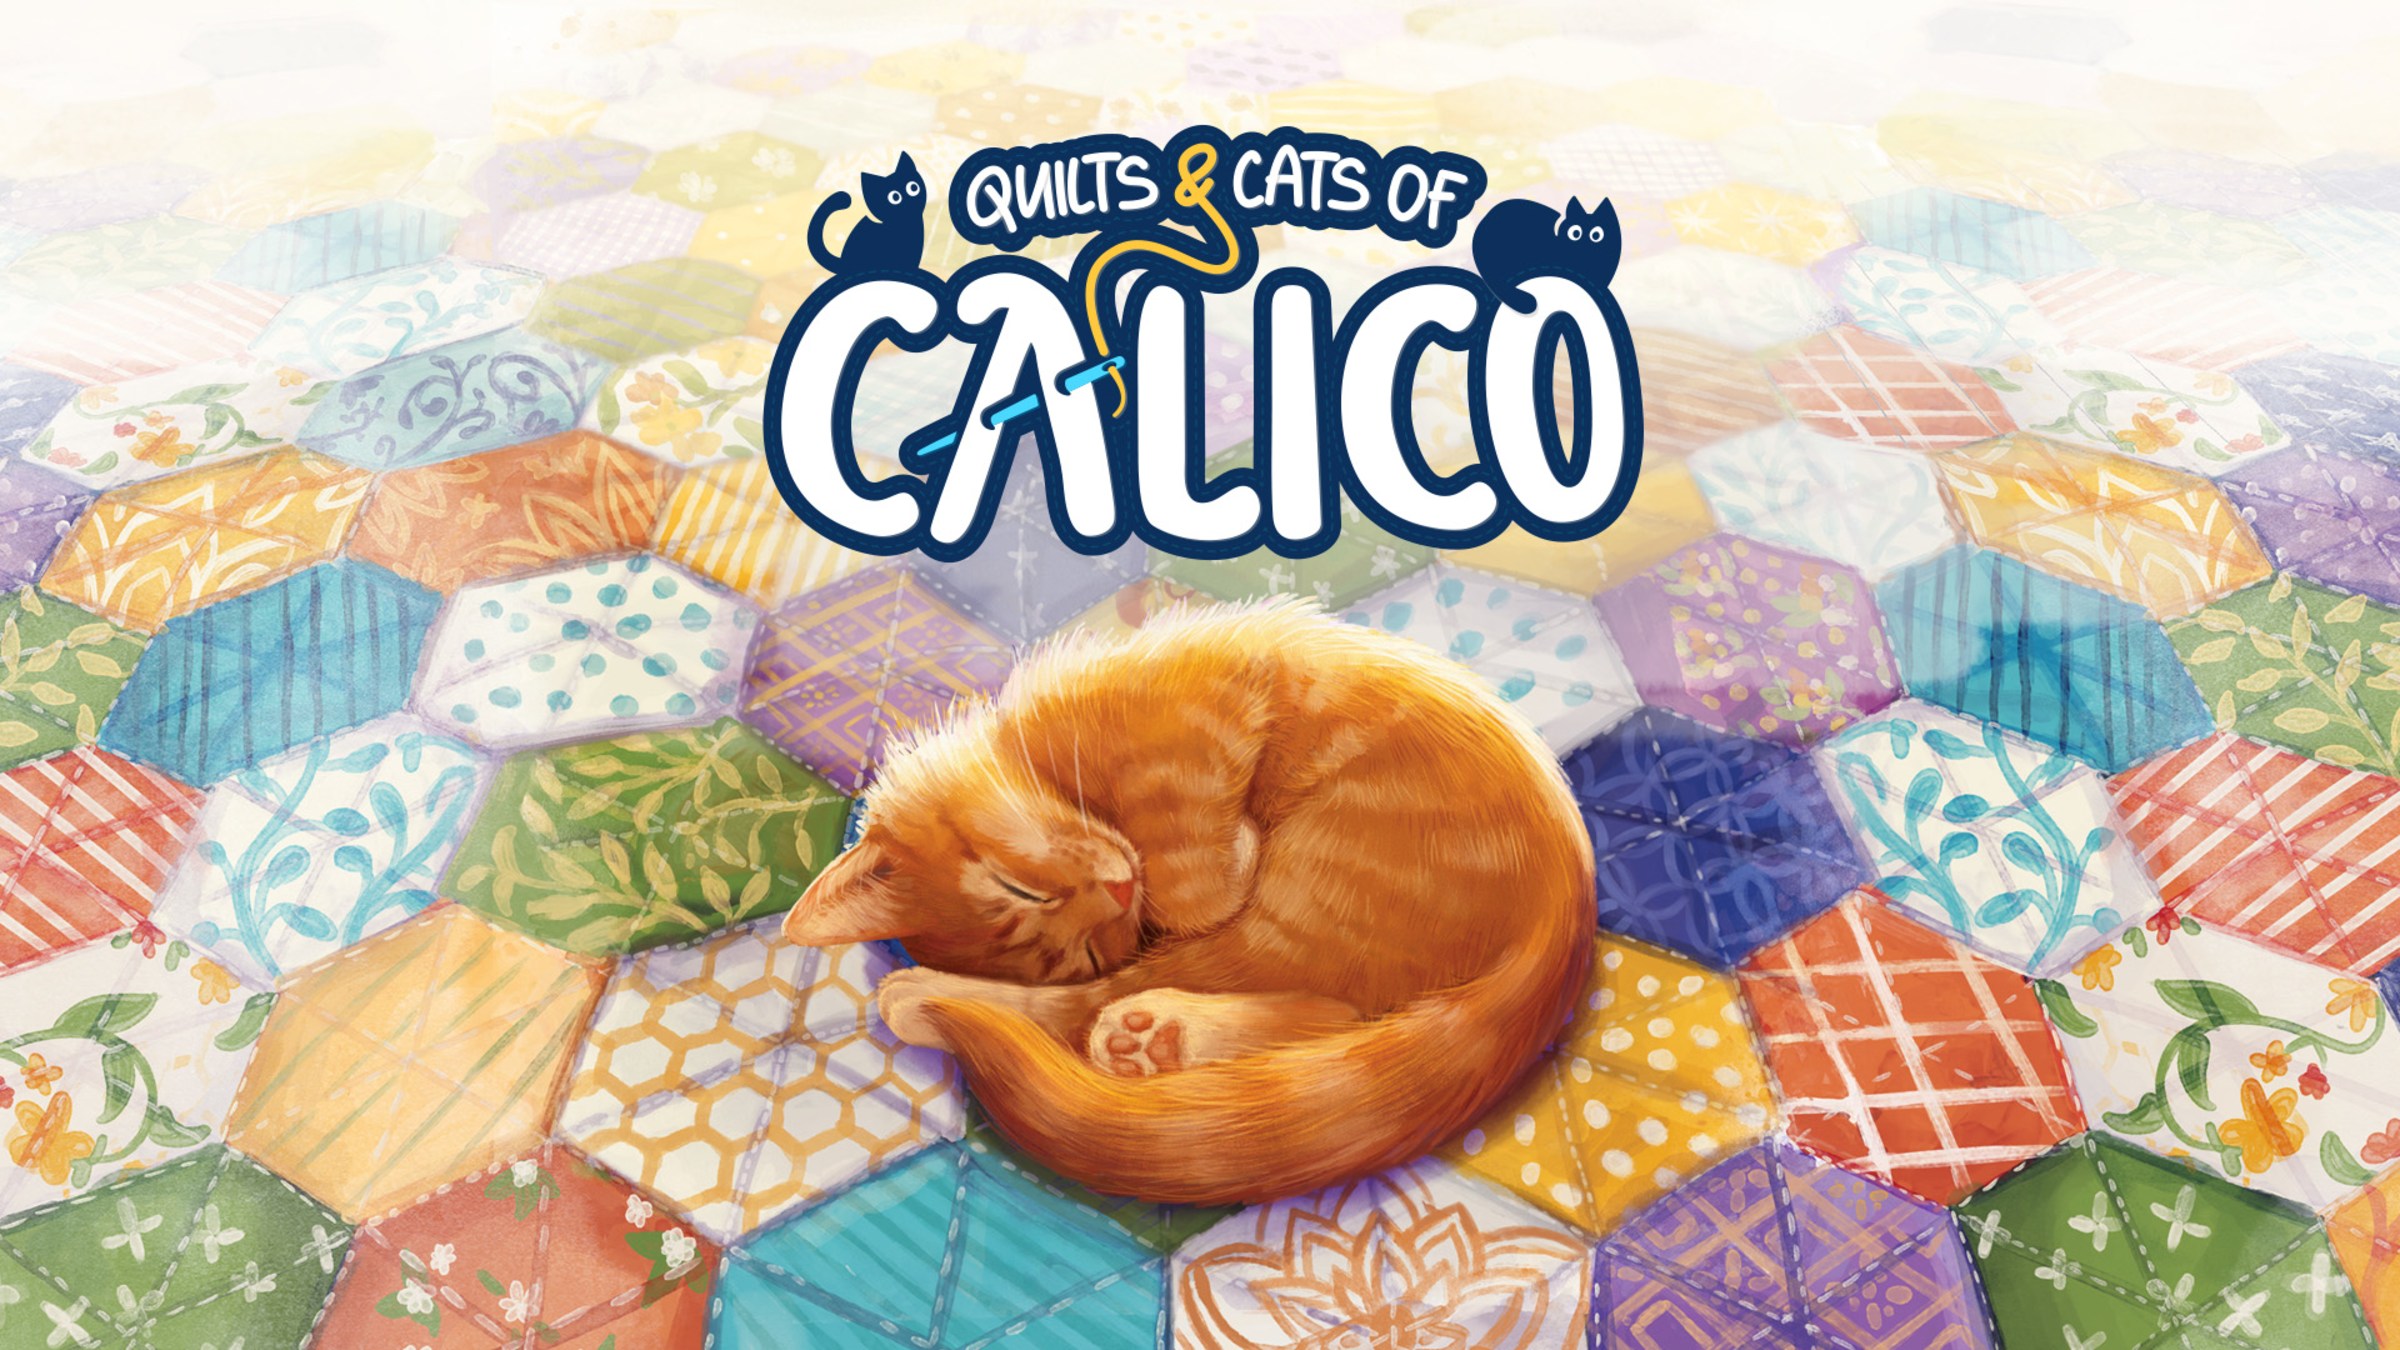 Quilts and Cats of Calico Xbox Version Full Game Setup Free Download